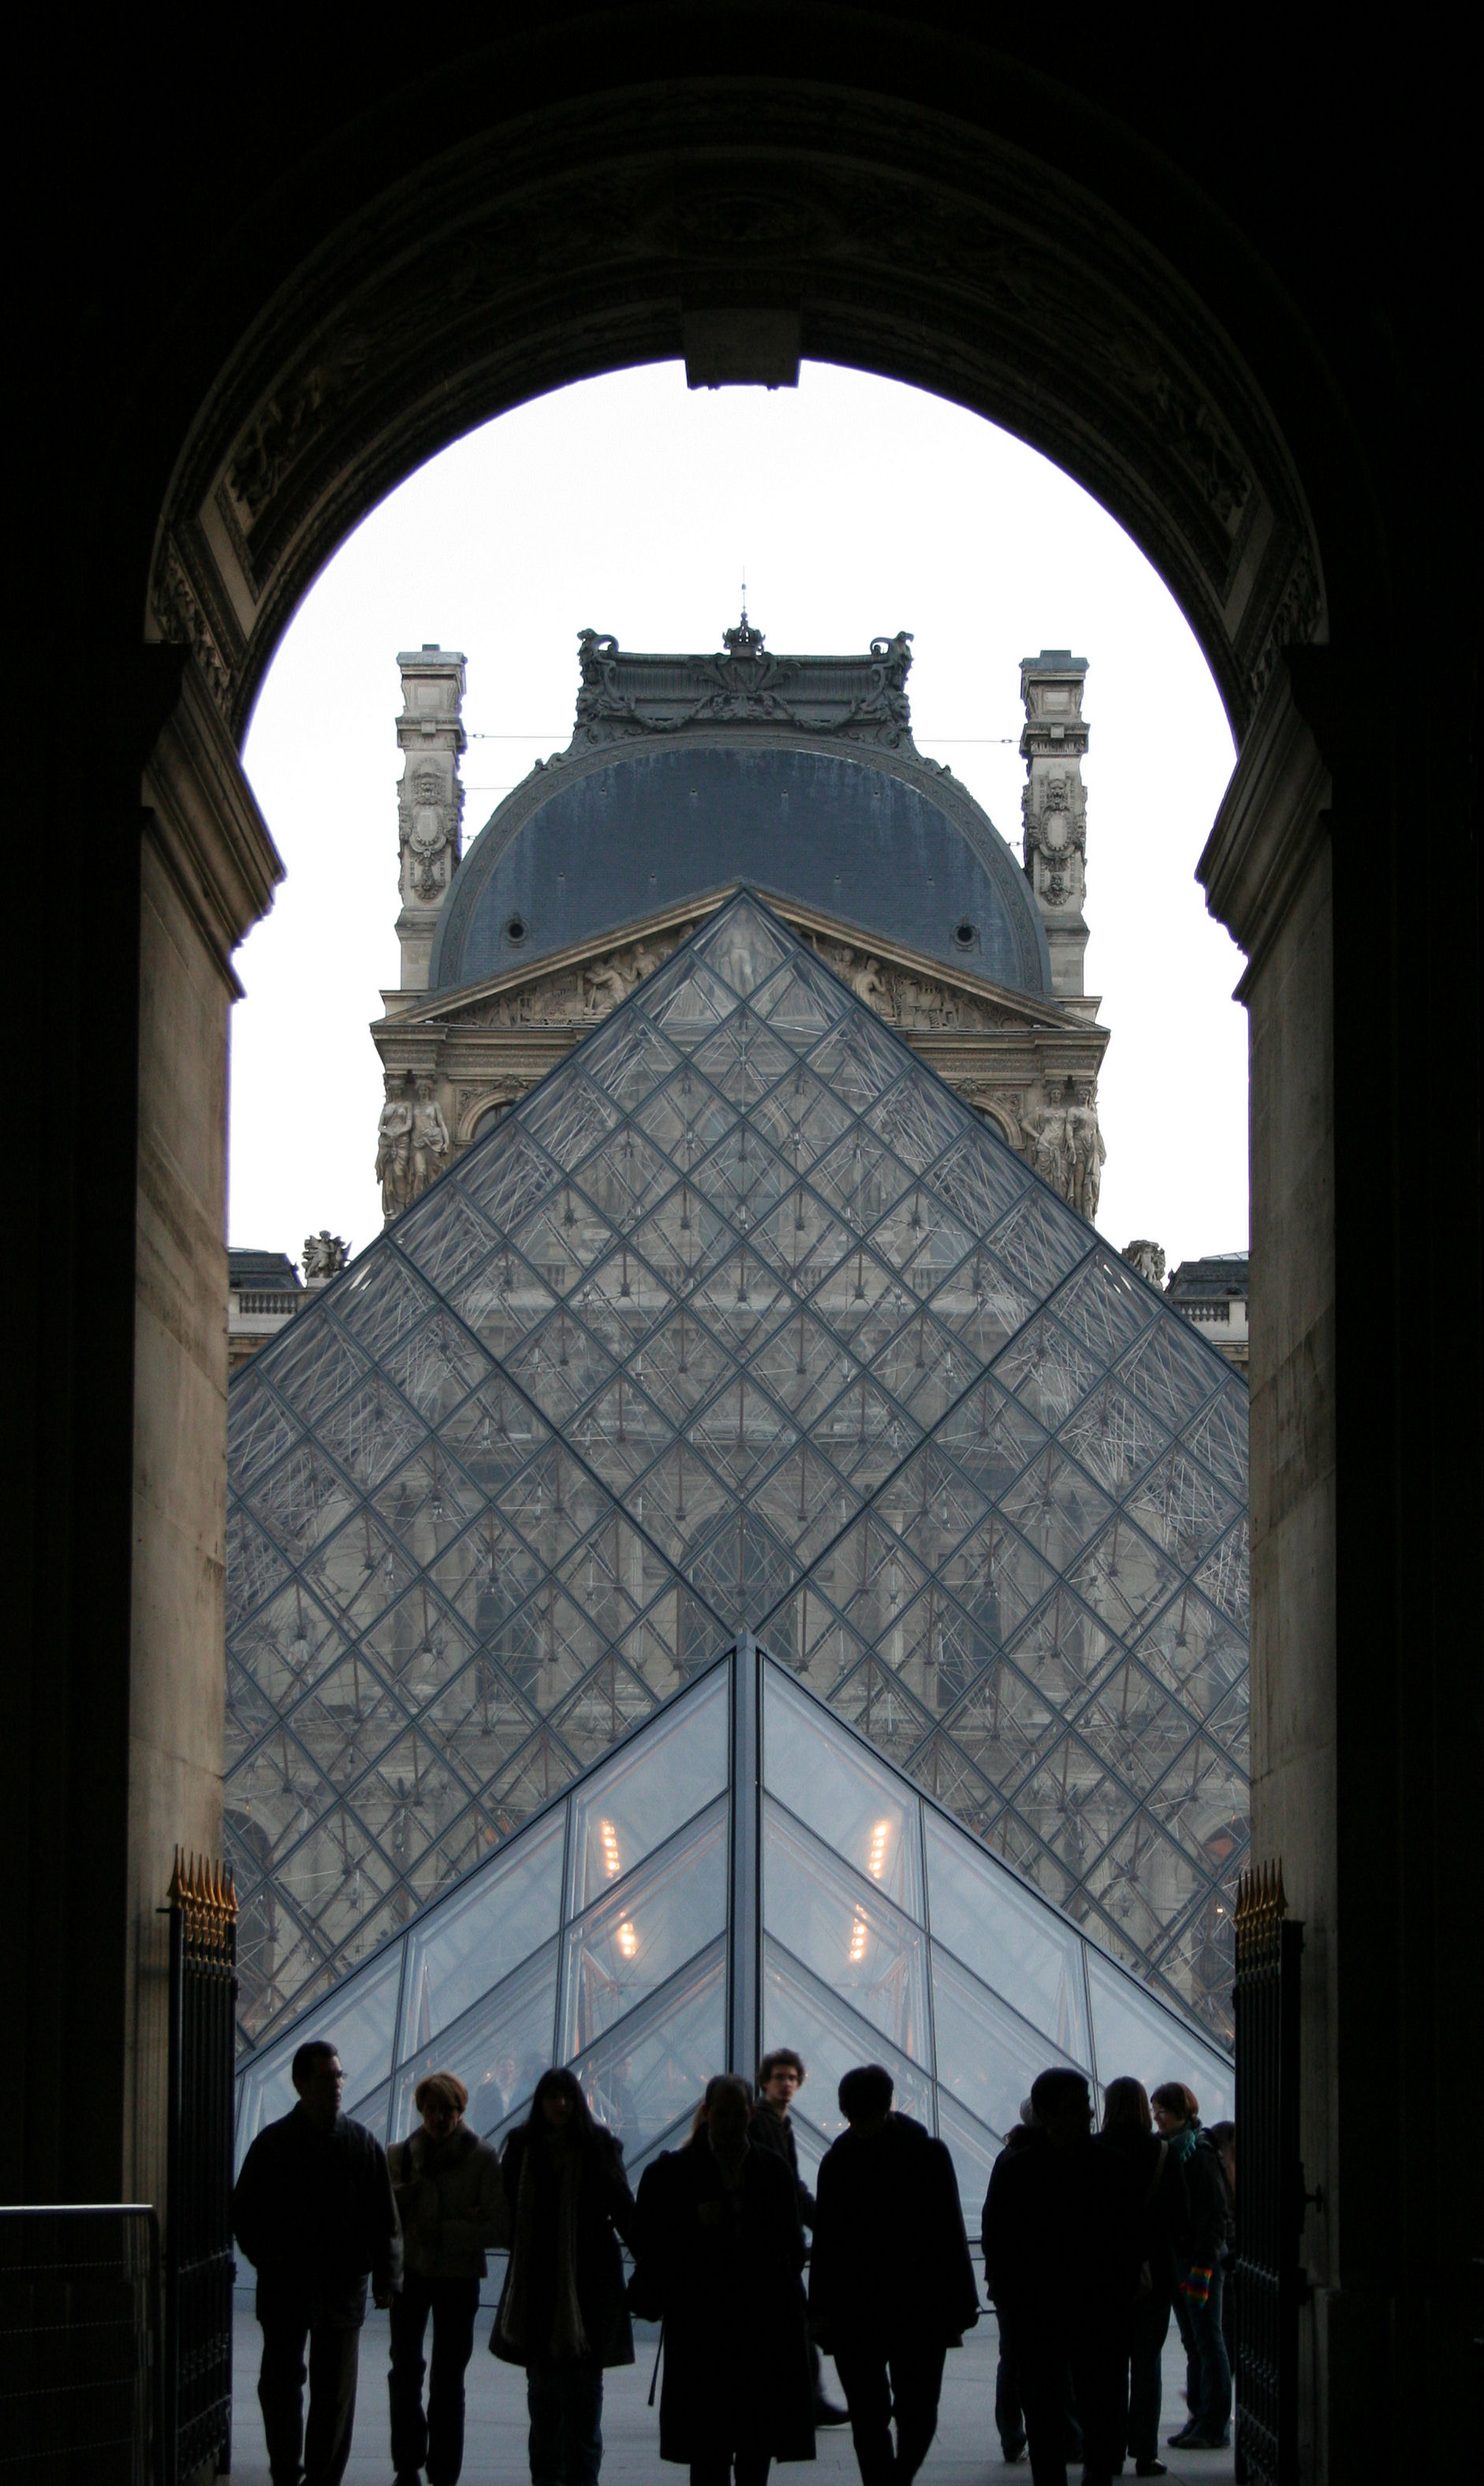 Louvre pyramids viewed from passage